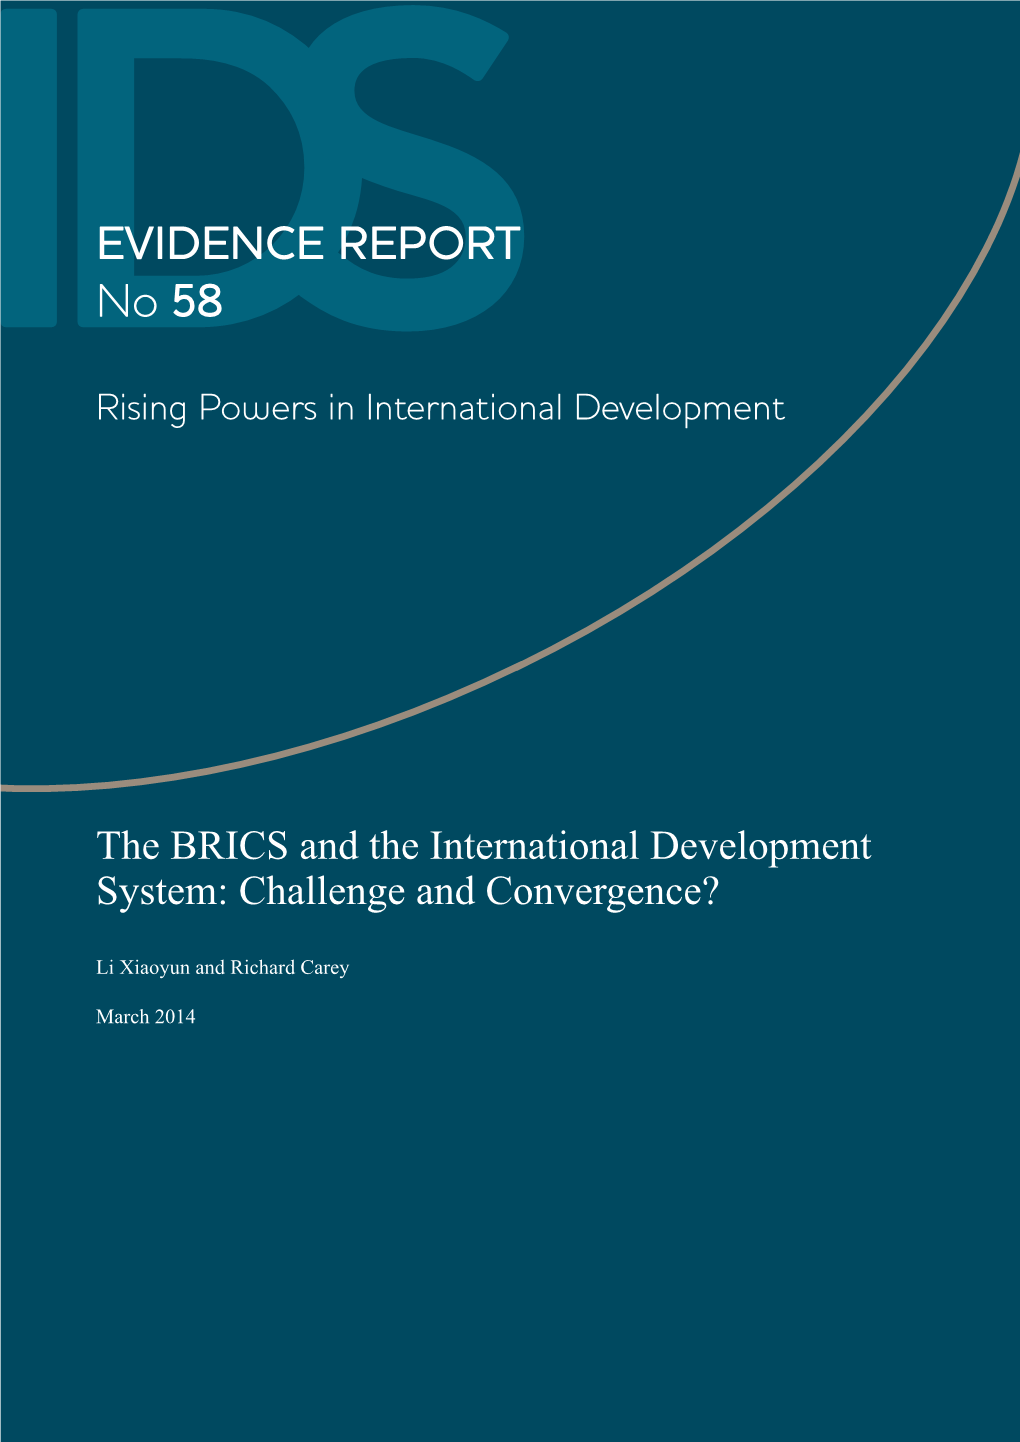 The BRICS and the International Development System: Challenge and Convergence?